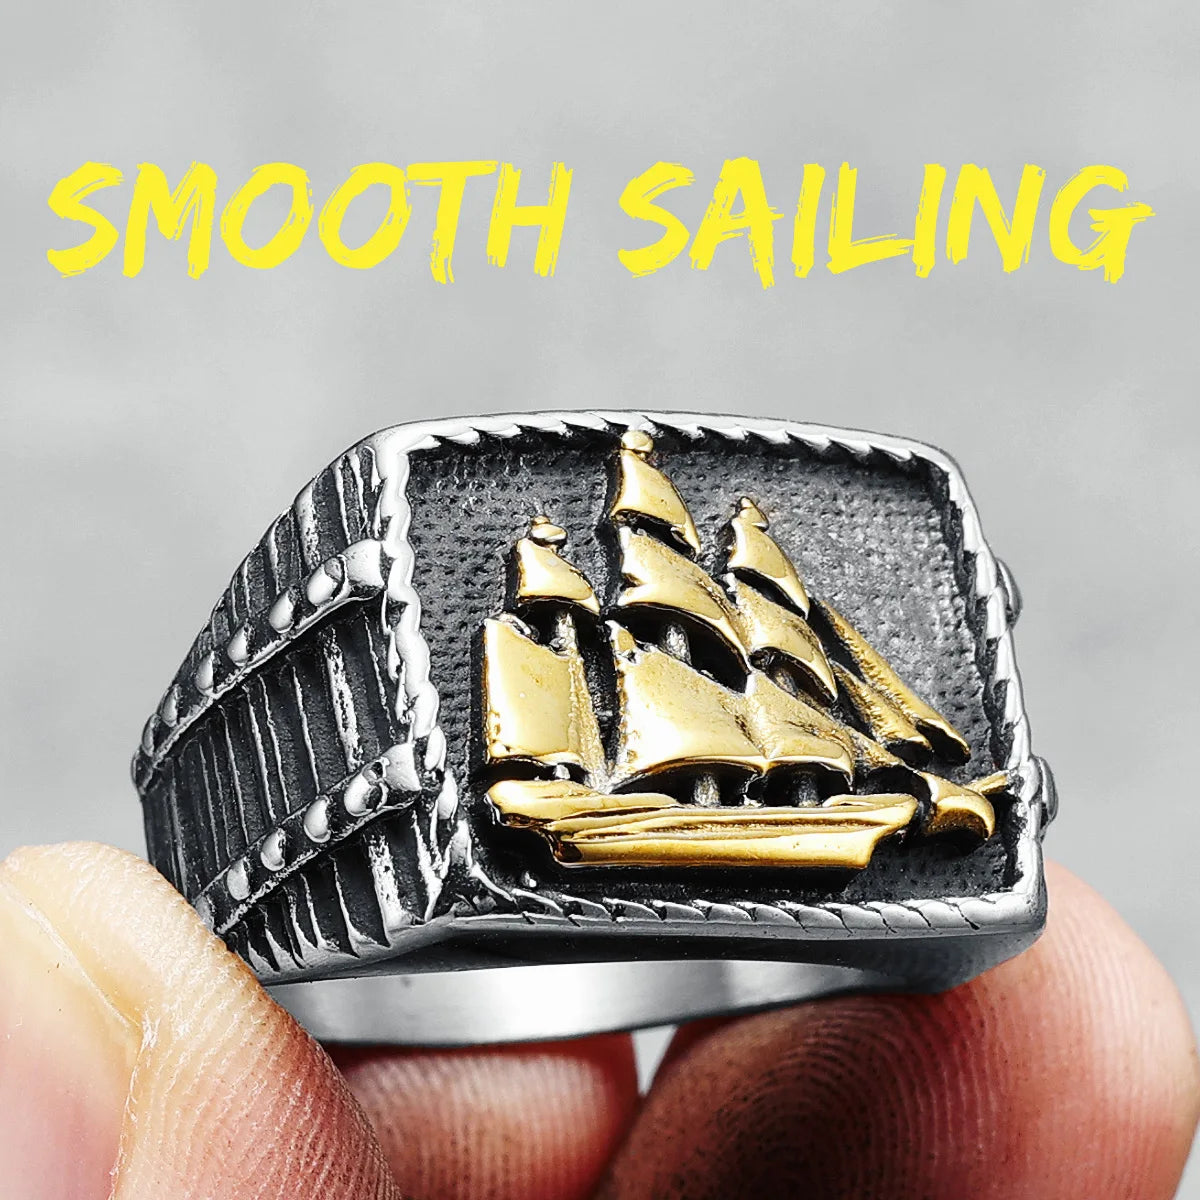 Sailboat Ring 316L Stainless Steel Men Rings Ocean Sailor Smooth Sailing Rock Rap for Biker Male Boyfriend Jewelry Best Gift R872-Sailing Golden